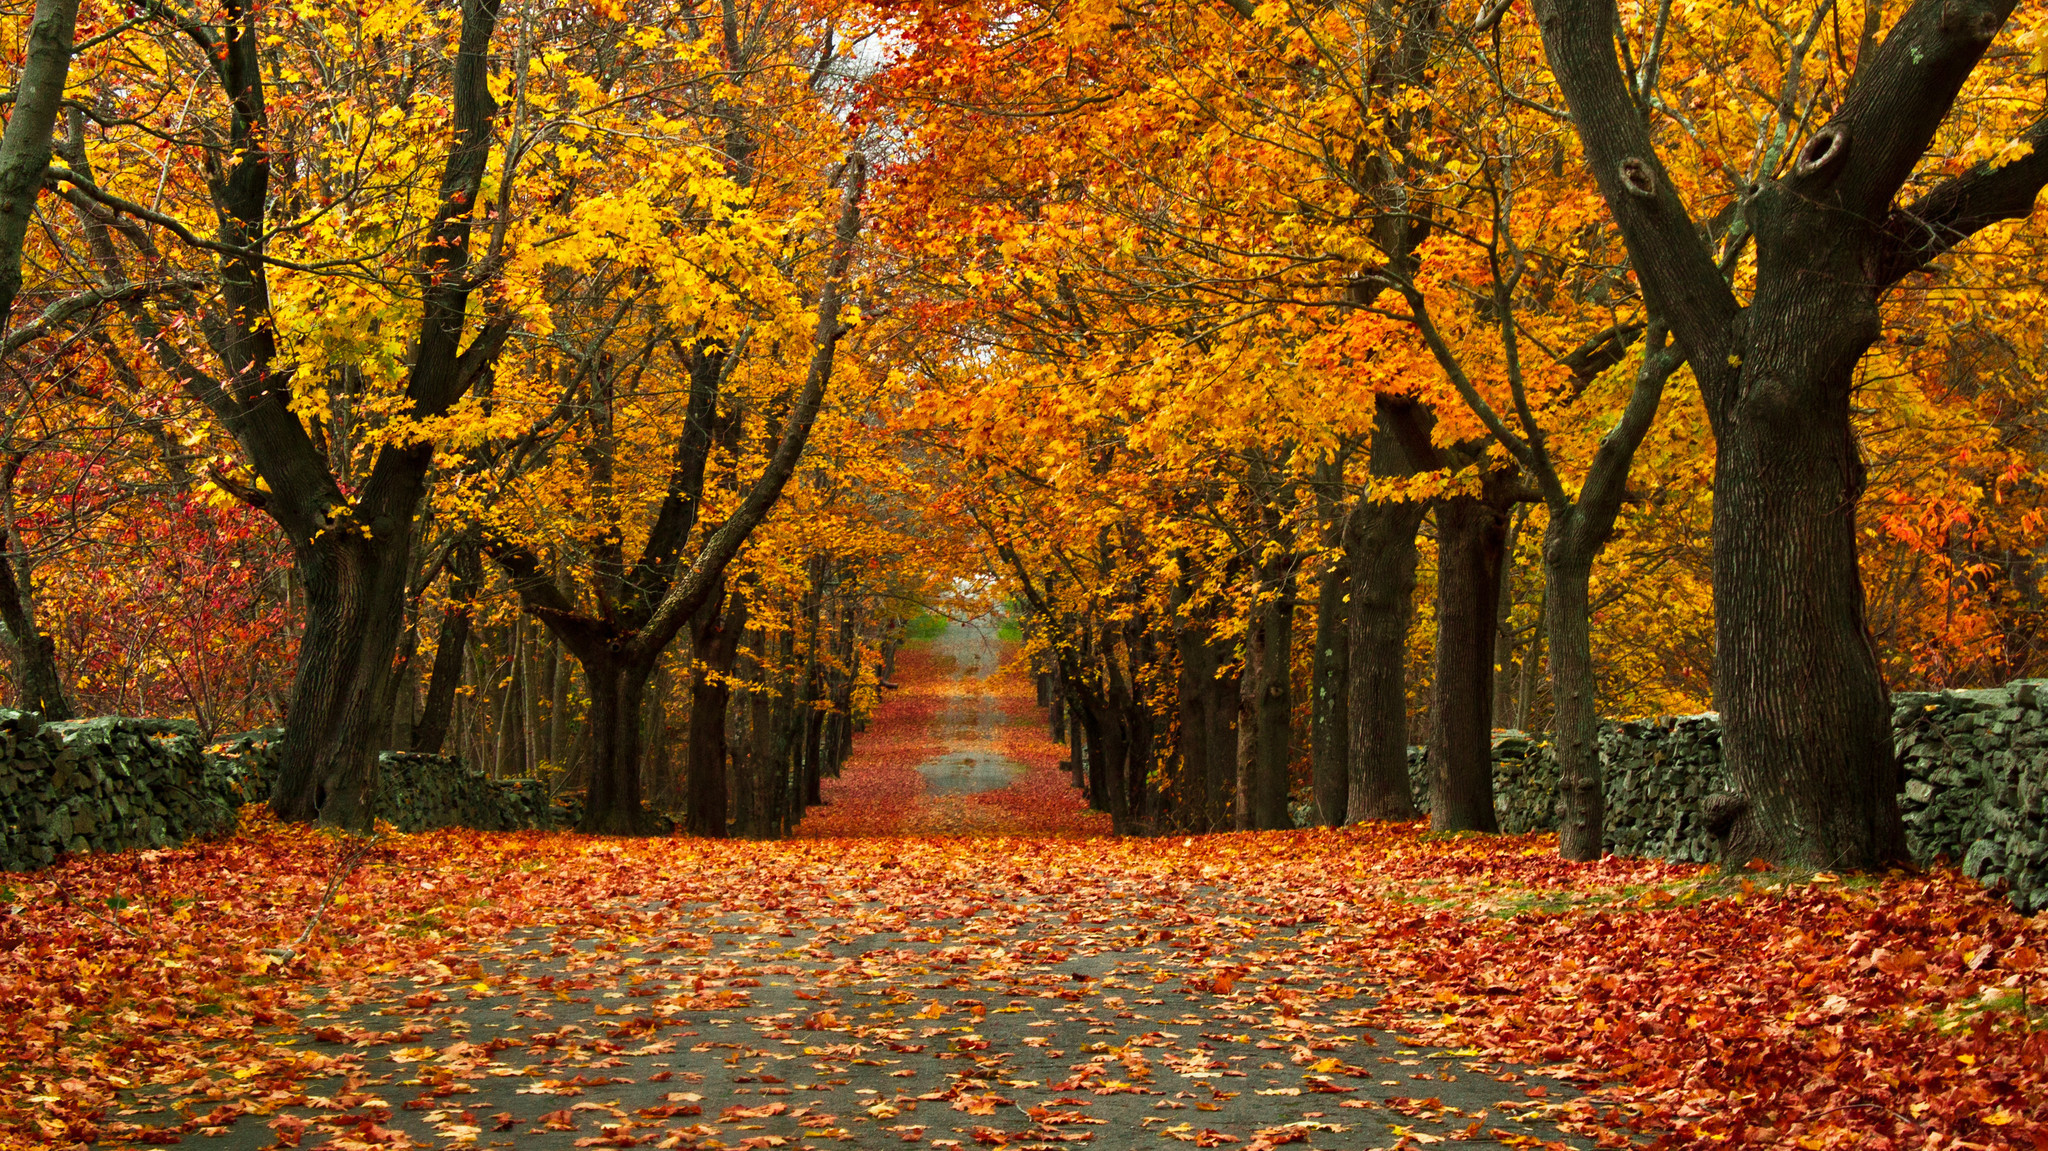 VIDEO: 28 small towns with the most beautiful fall foliage - The ...